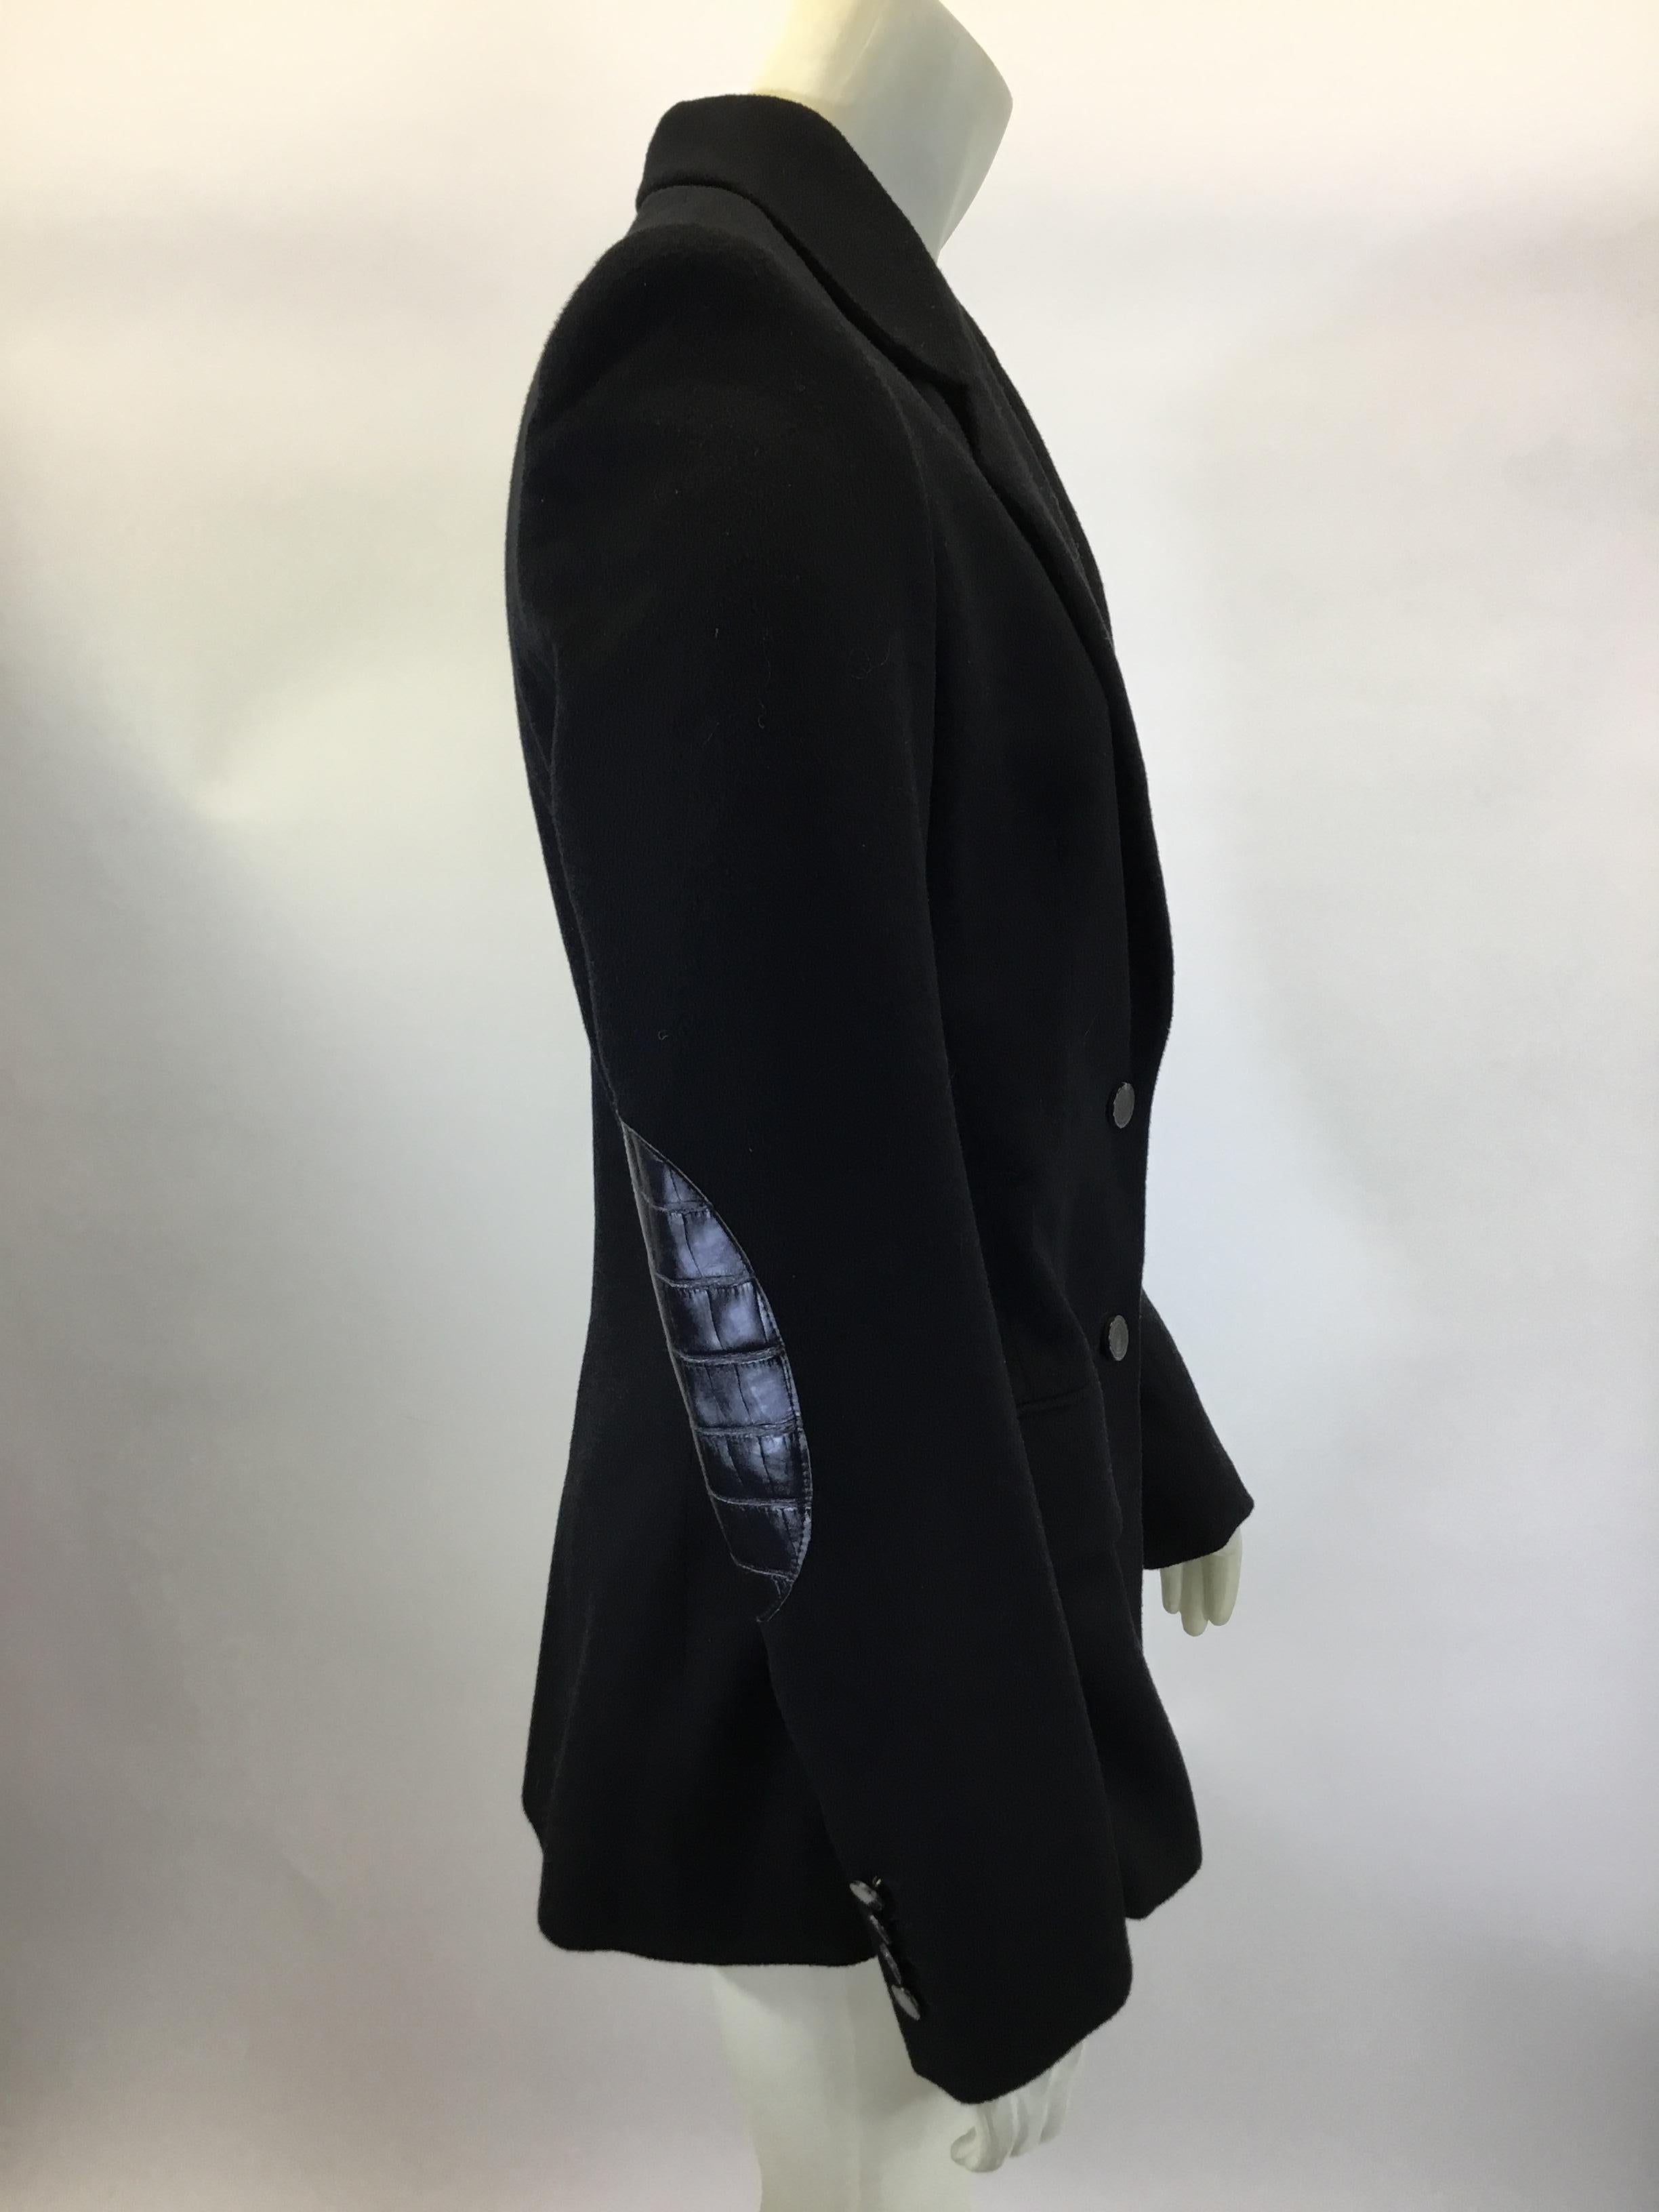 The Row Black Cashmere Jacket with Leather Elbow Patches
$550
Length 28”
Bust 36”
Waist 31”